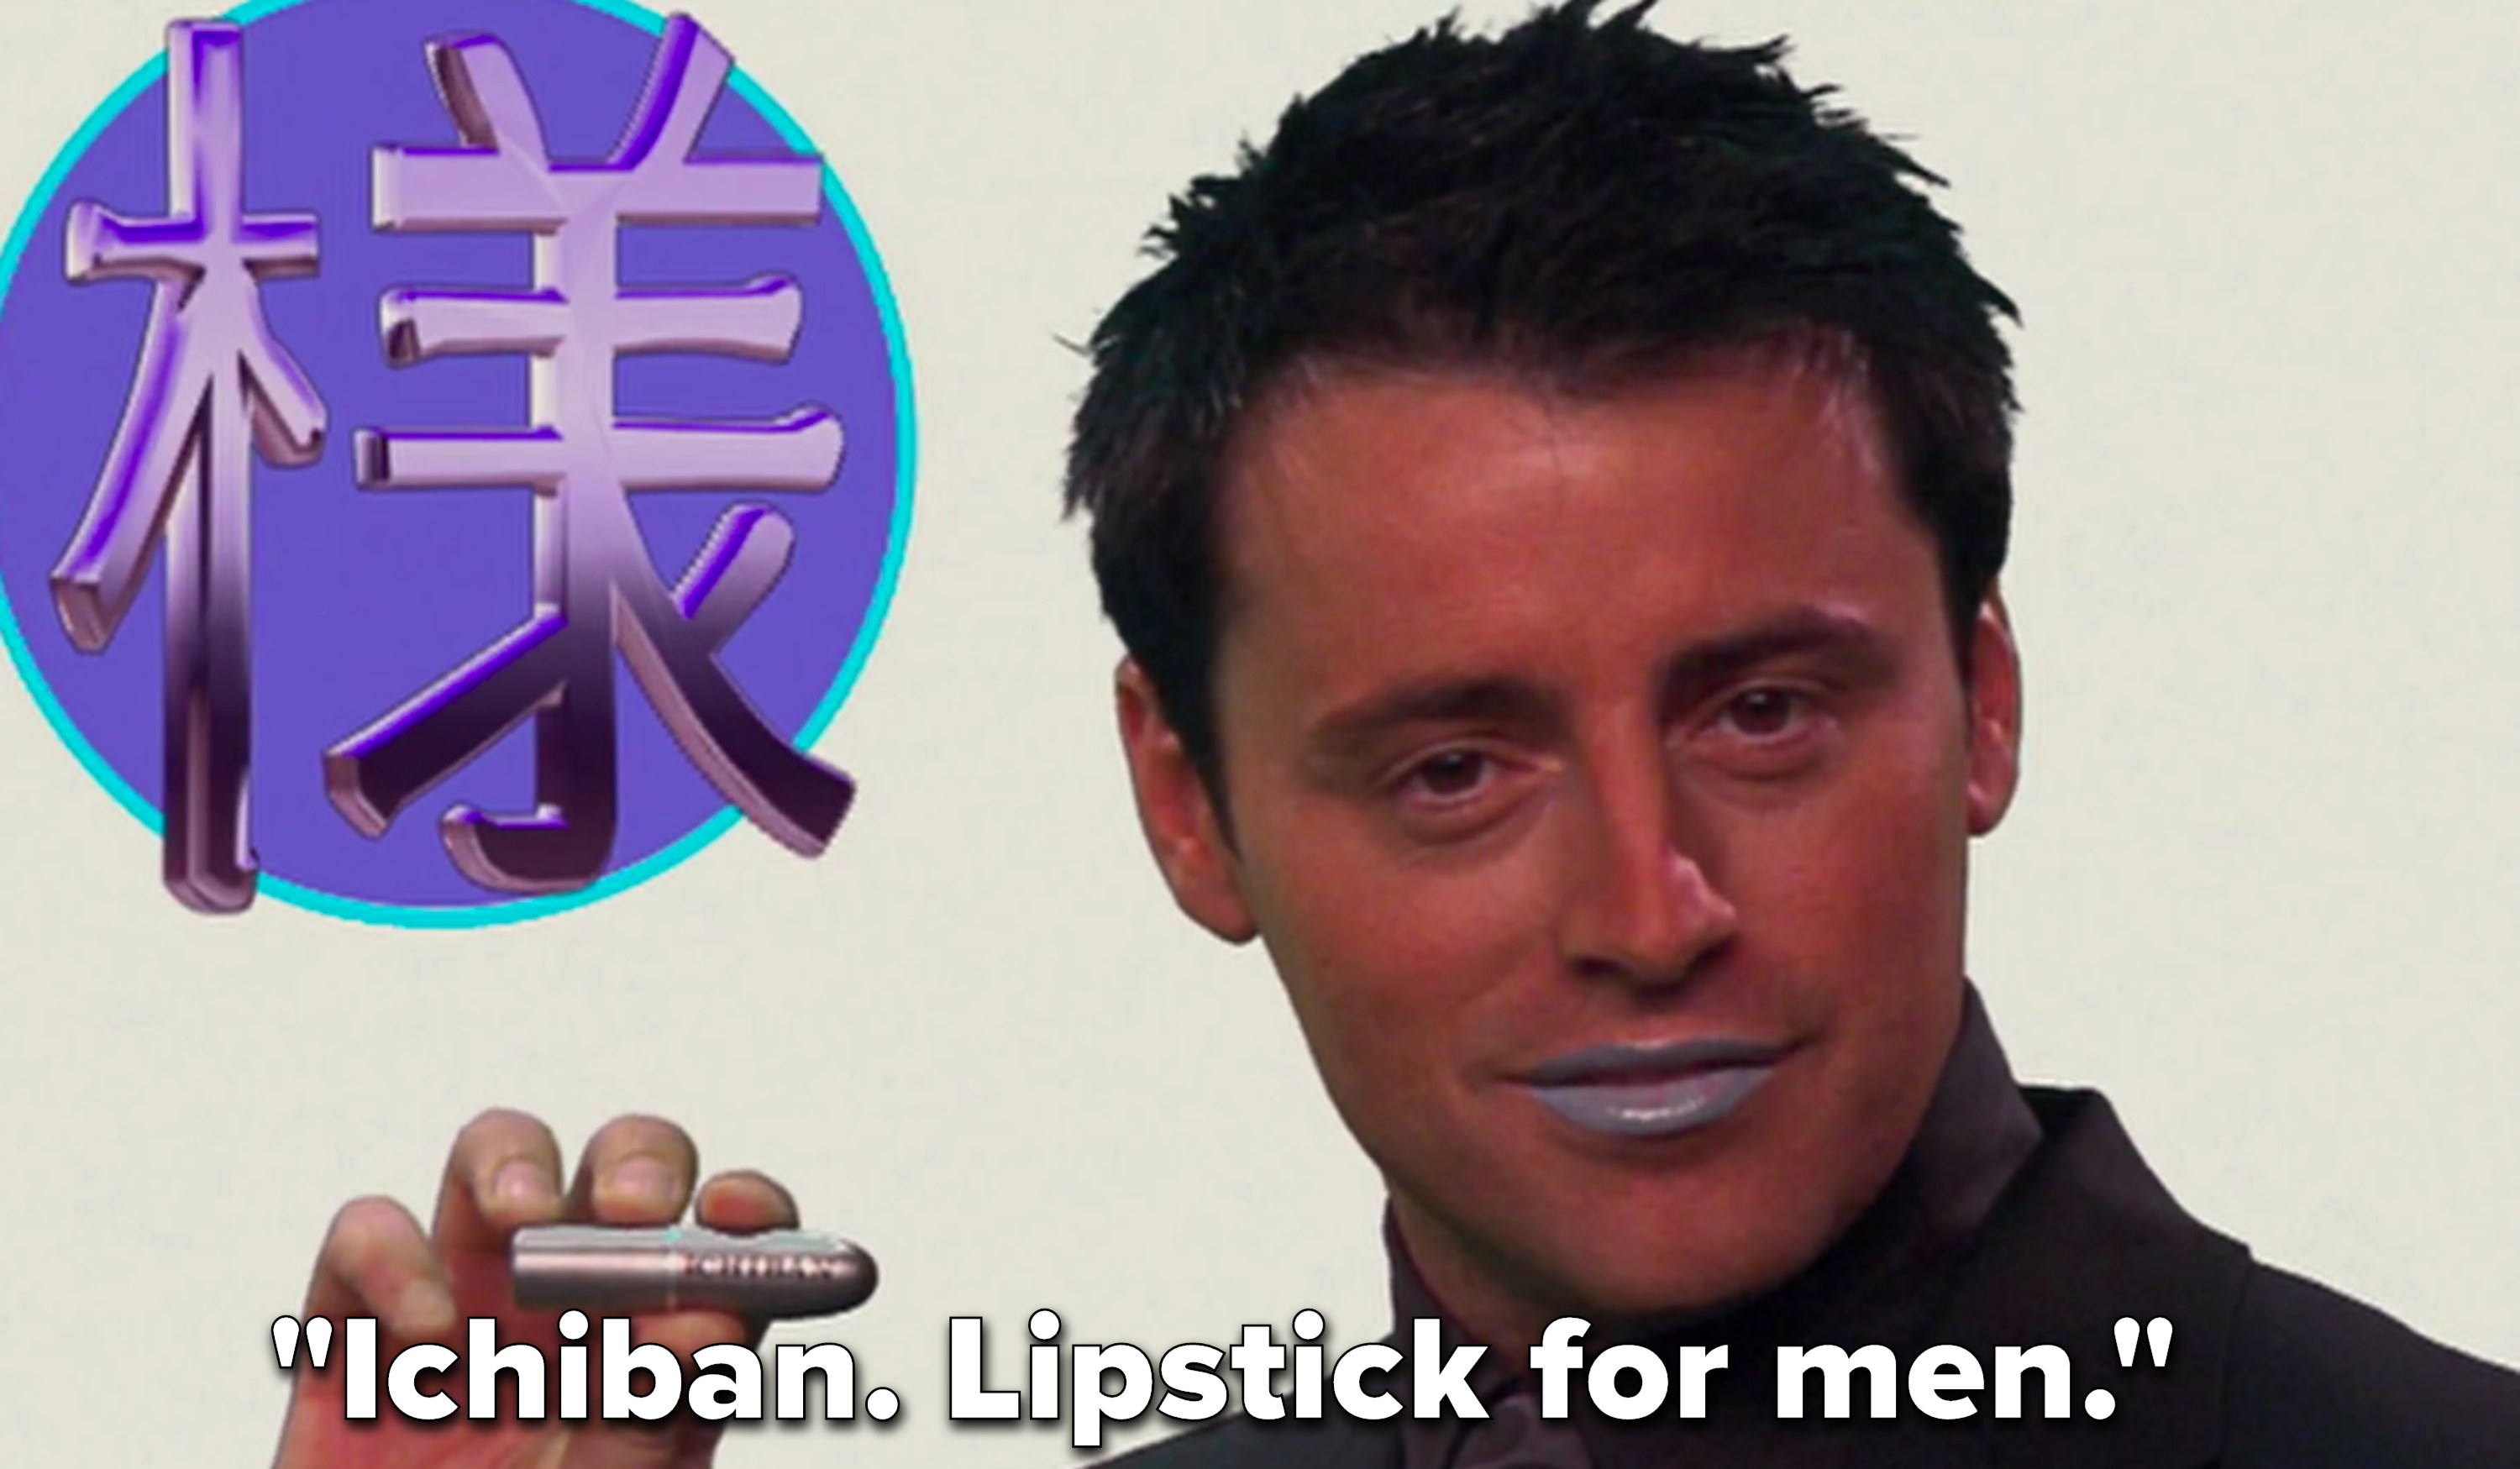 Joey, in his ad, says, &quot;Ichiban, lipstick for men&quot;